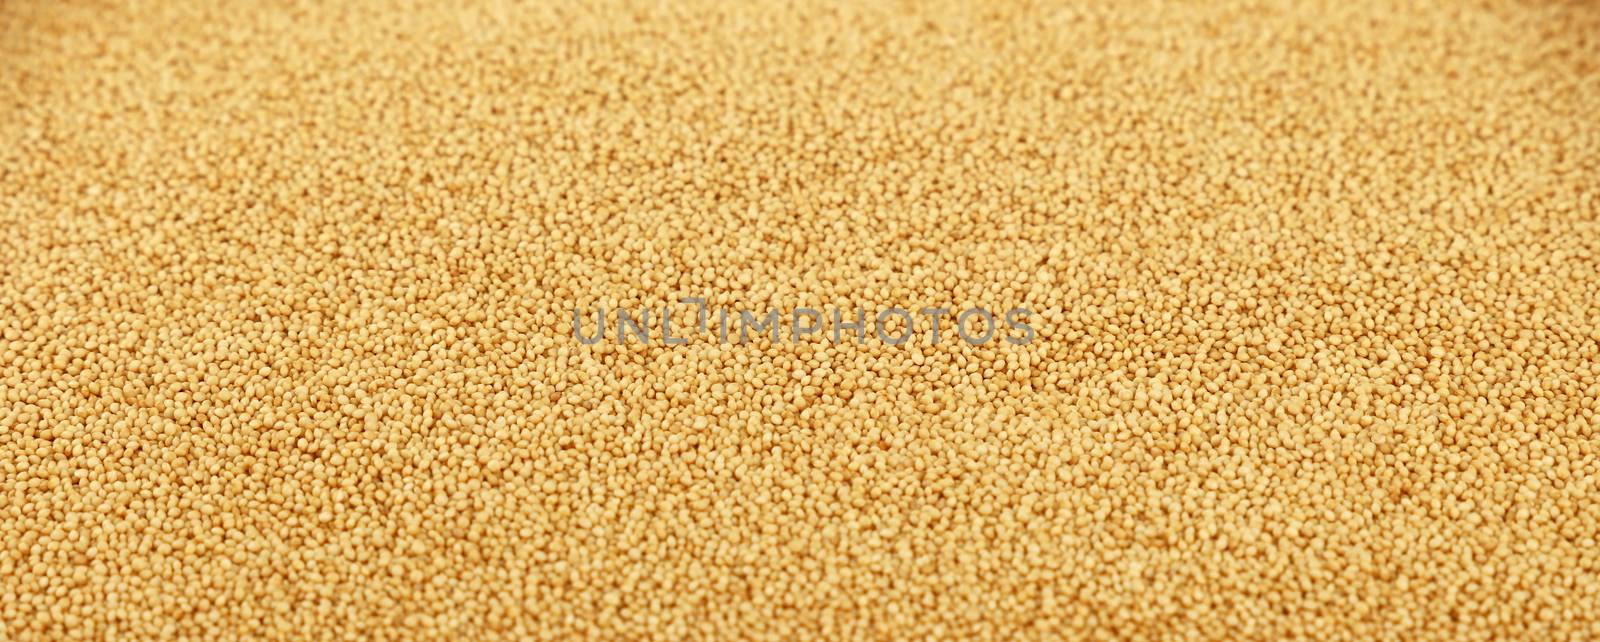 Amaranth grain seeds close up pattern background, low angle view, selective focus